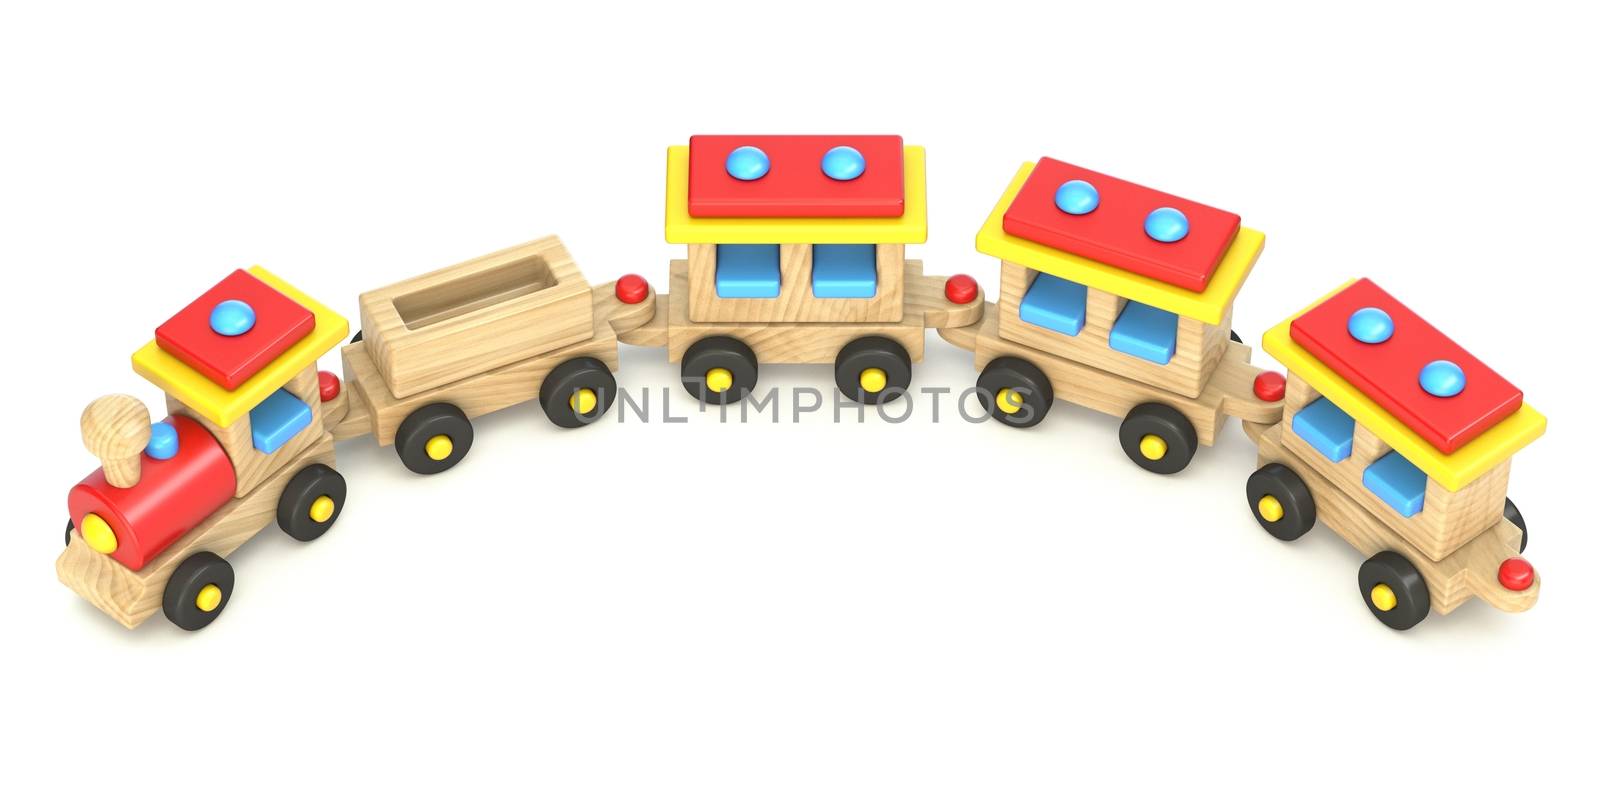 Wooden train 3D render illustration isolated on white background